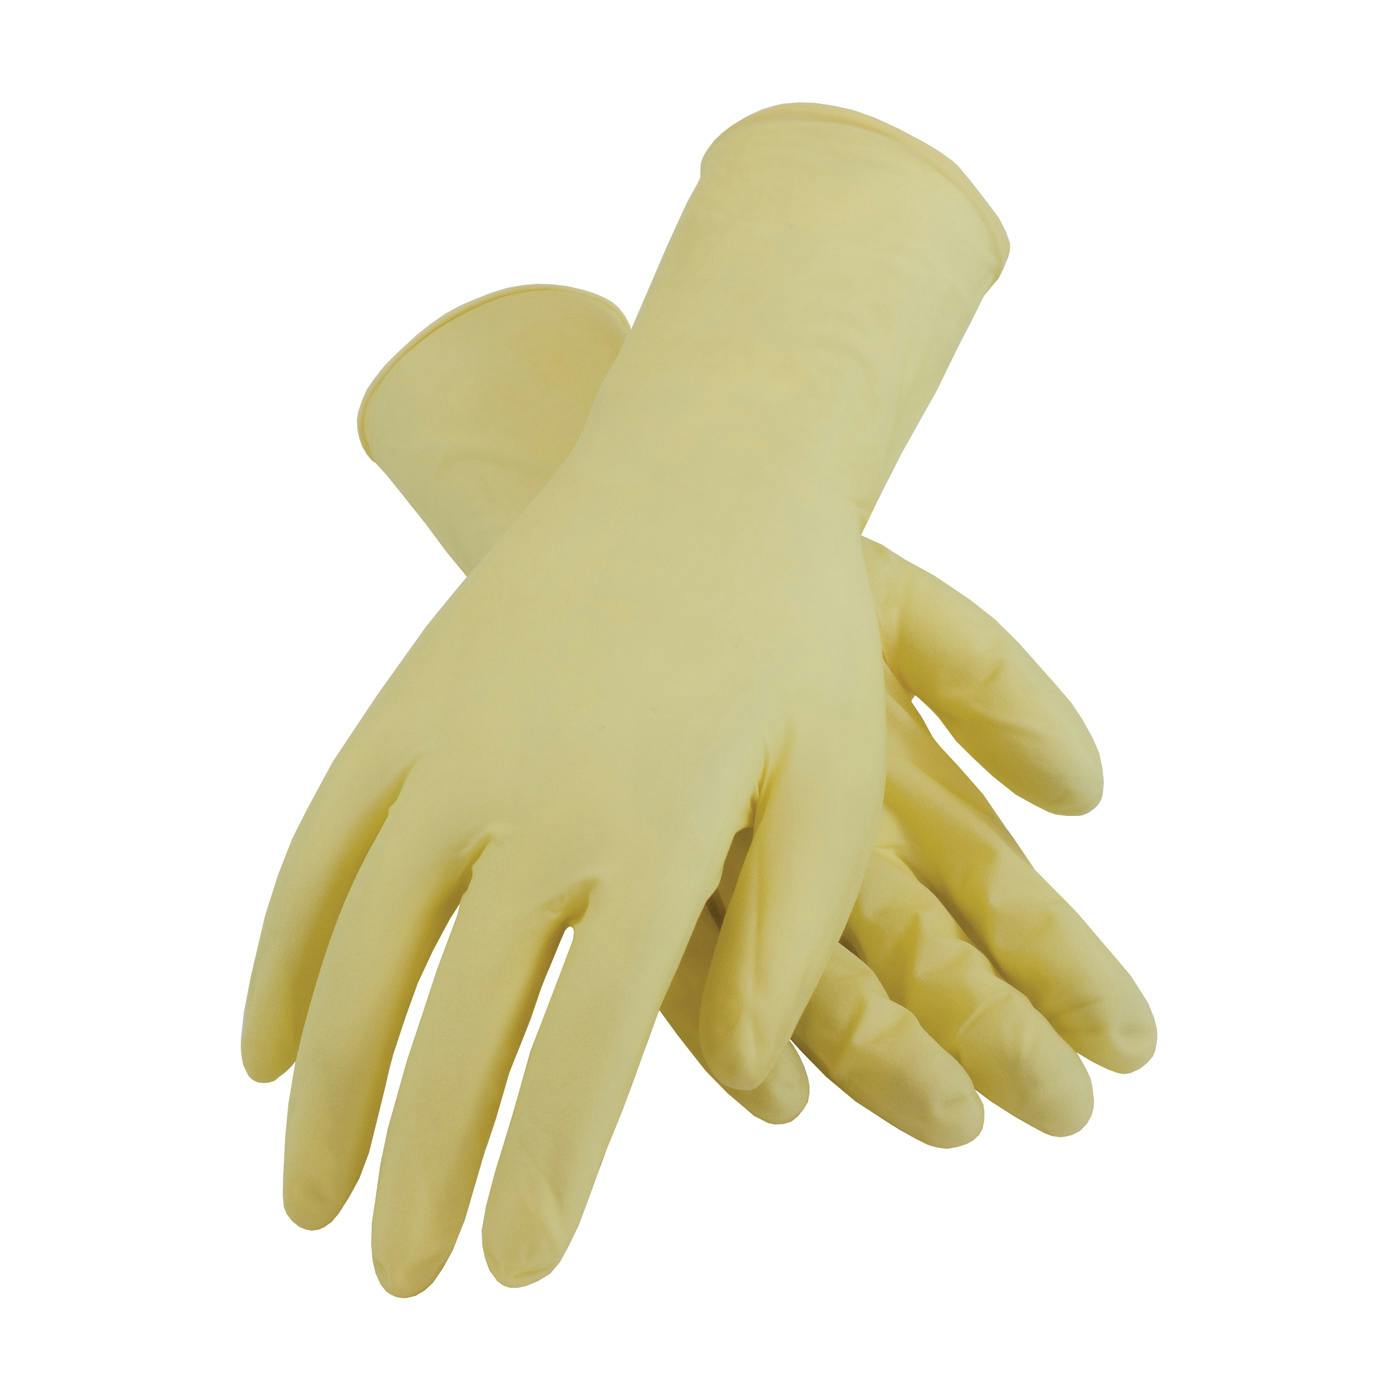 CleanTeam® Single Use Class 100 Cleanroom Latex Glove with Fully Textured Grip - 12" (100-323000)_1